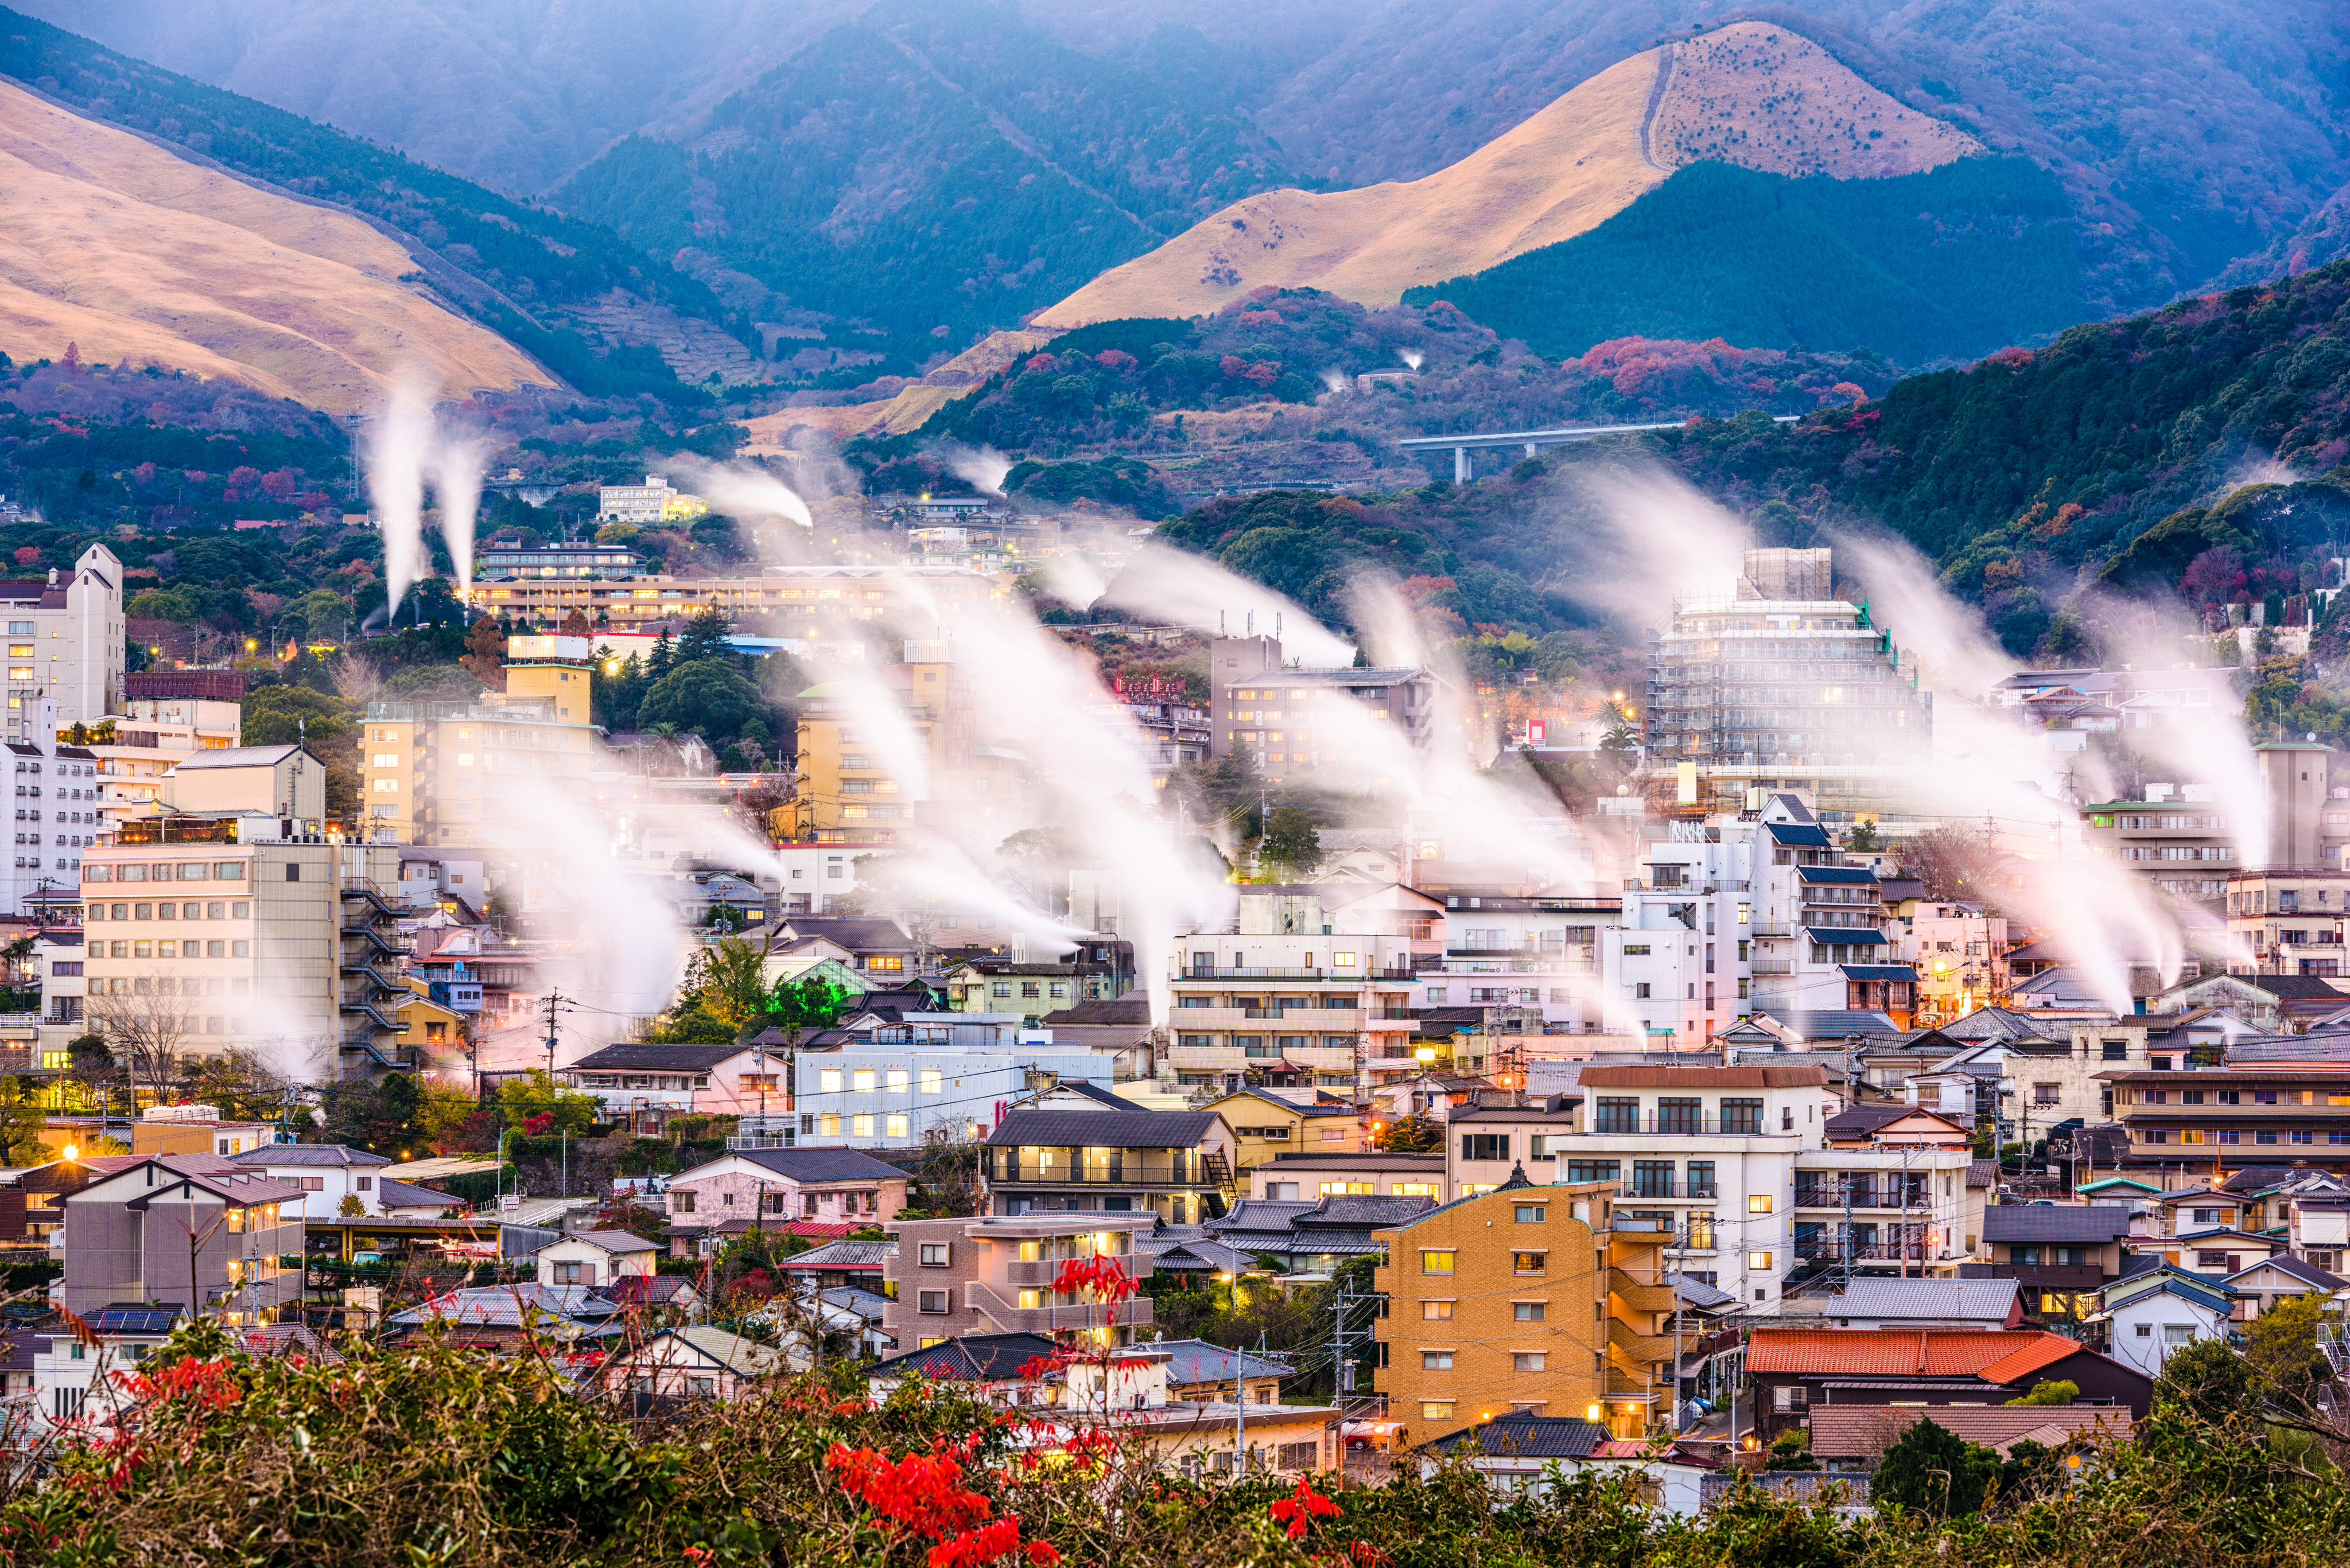 Beppu, a village in Kyushu, Japan, known for its hot-spring bathhouses. Photo: Shutterstock